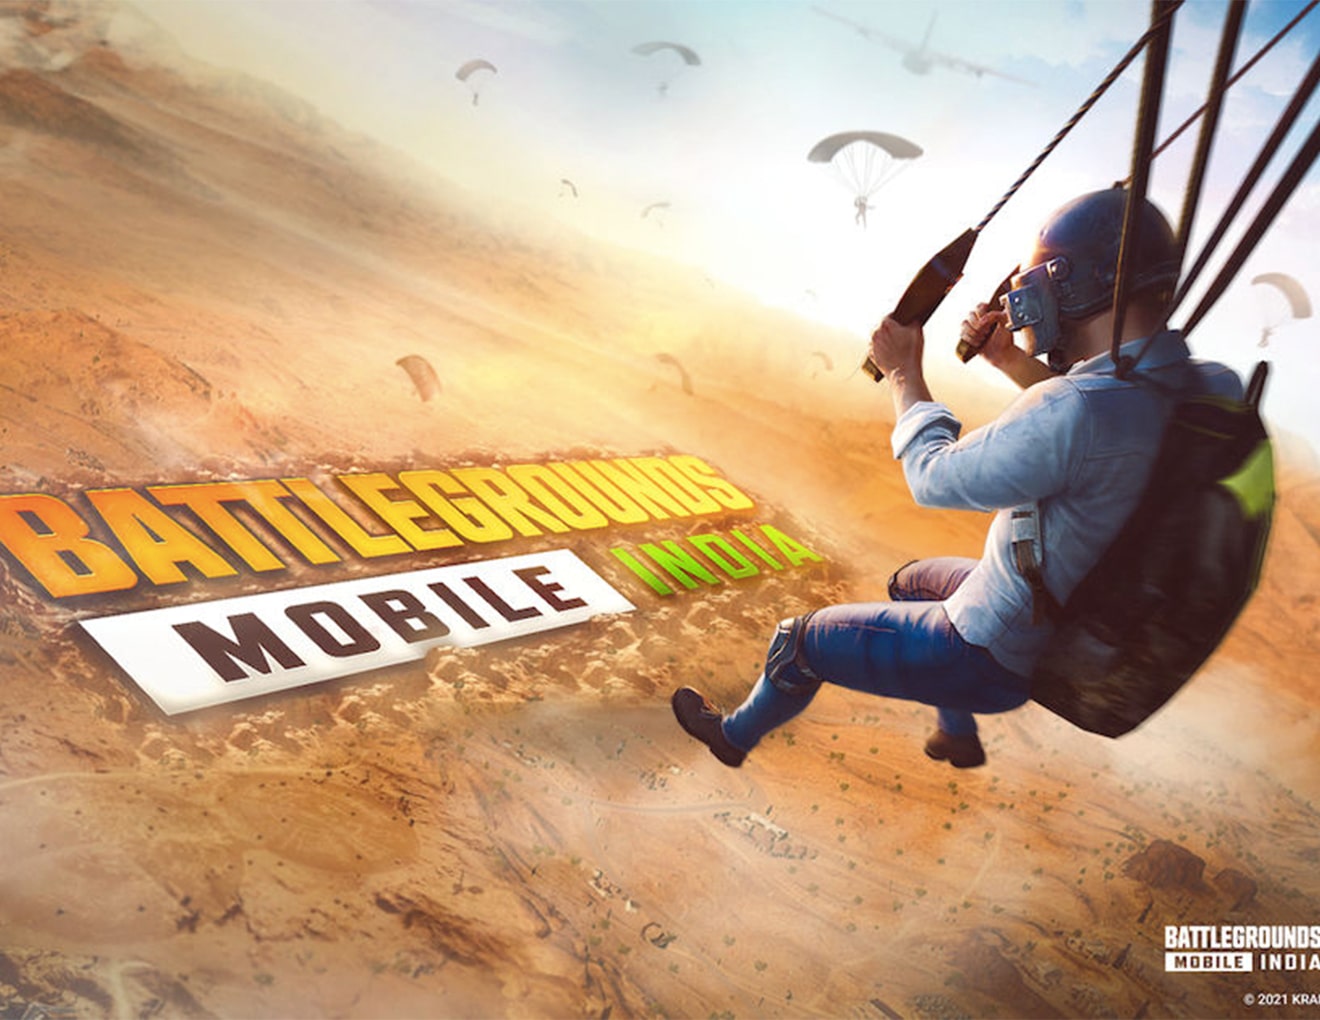 PUBG Maker’s Battlegrounds Mobile India Record 20 Mn+ Pre-Registrations In 2 Weeks